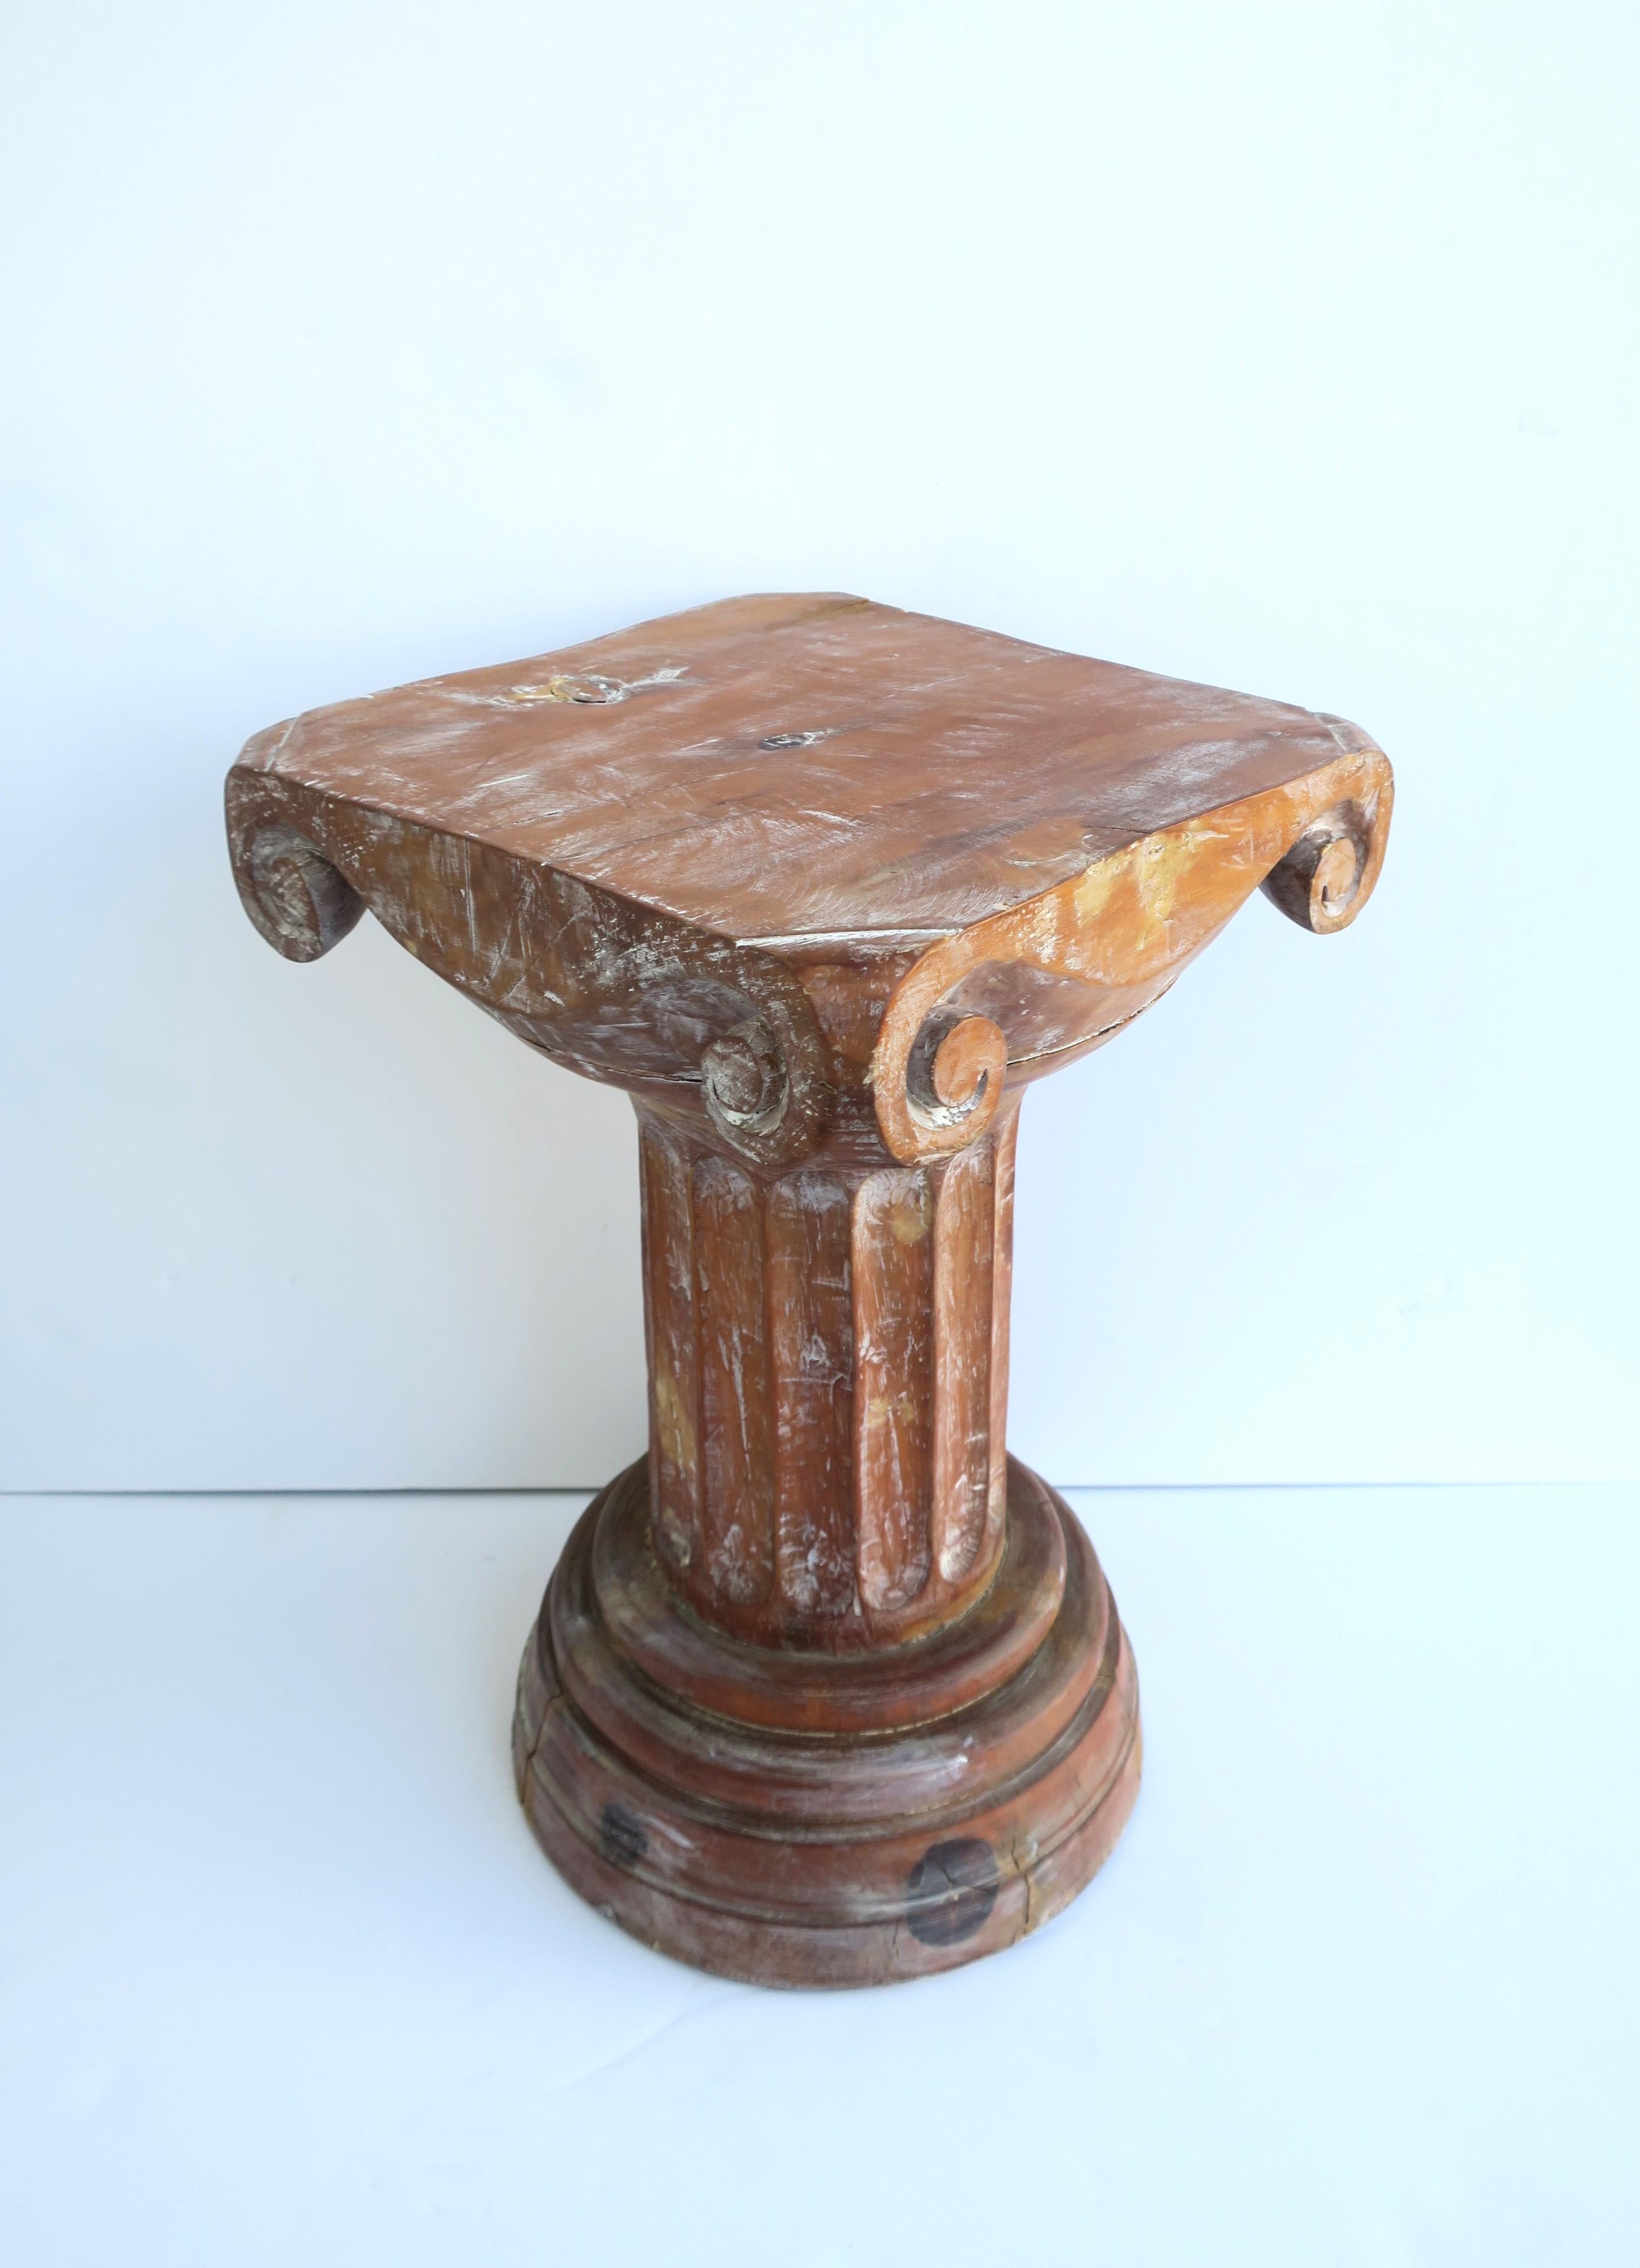 Wood Column Pedestal Table Neoclassical for Sculpture or Cocktail For Sale 4